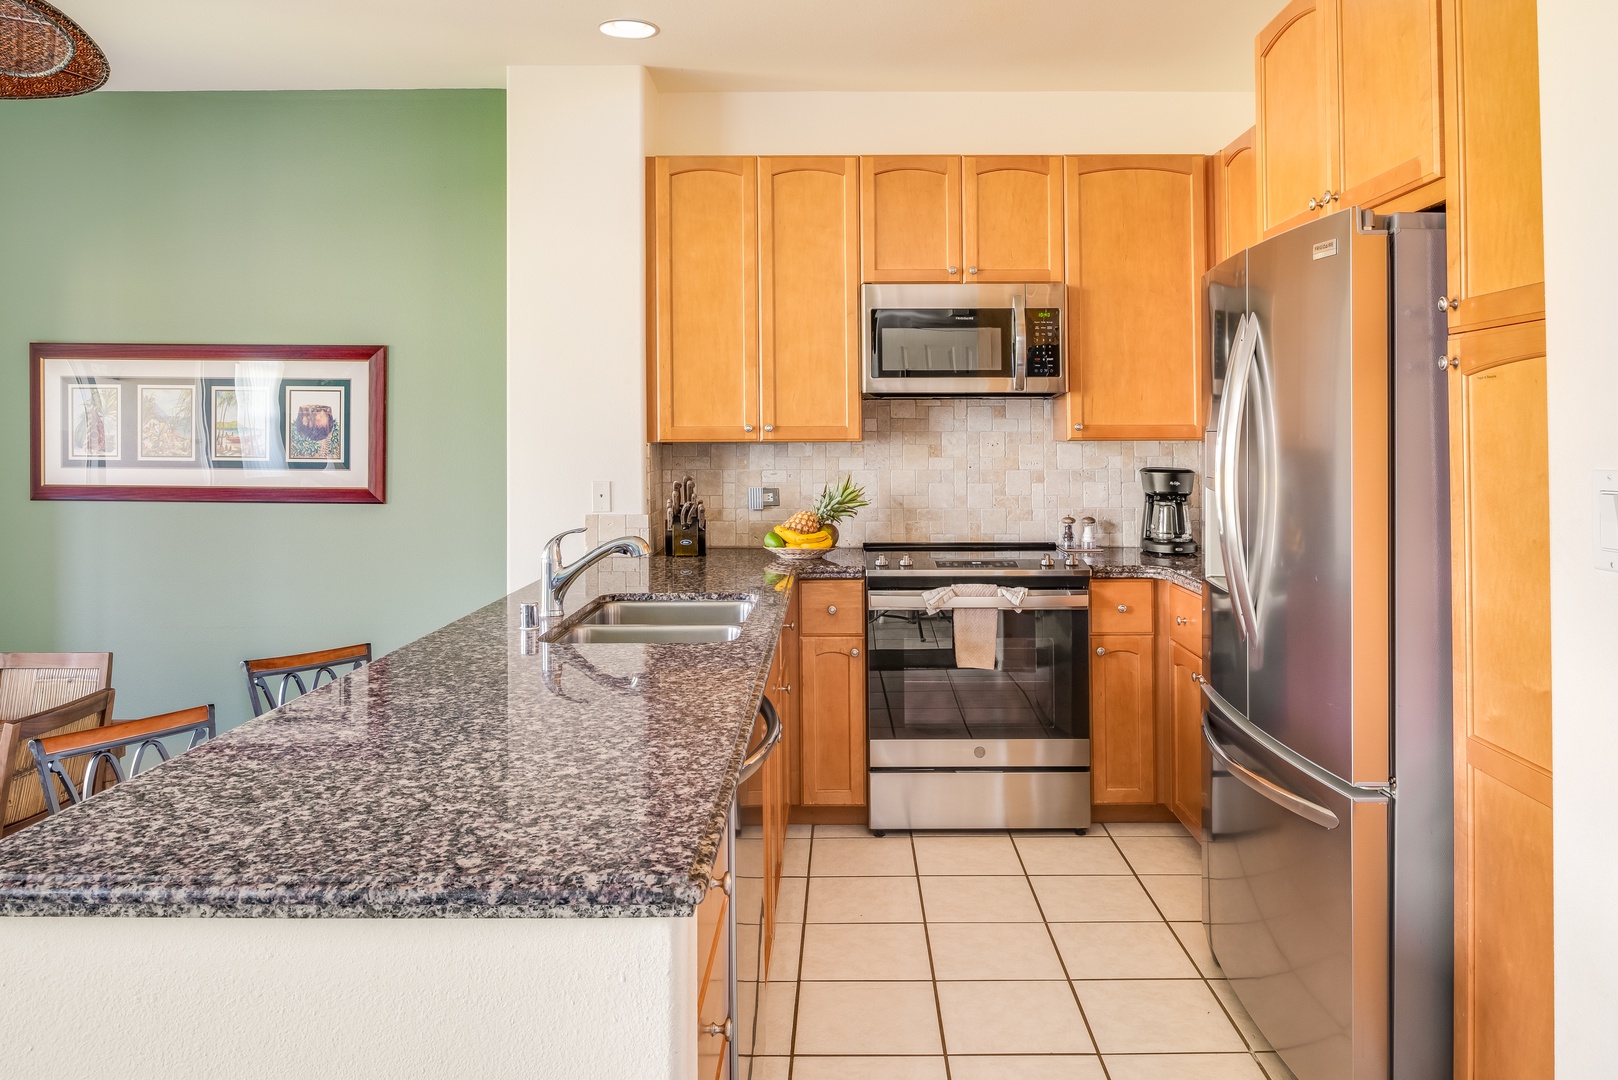 Waikoloa Vacation Rentals, Waikoloa Colony Villas 403 - Plenty of Counter Space in the Well-Equipped Kitchen